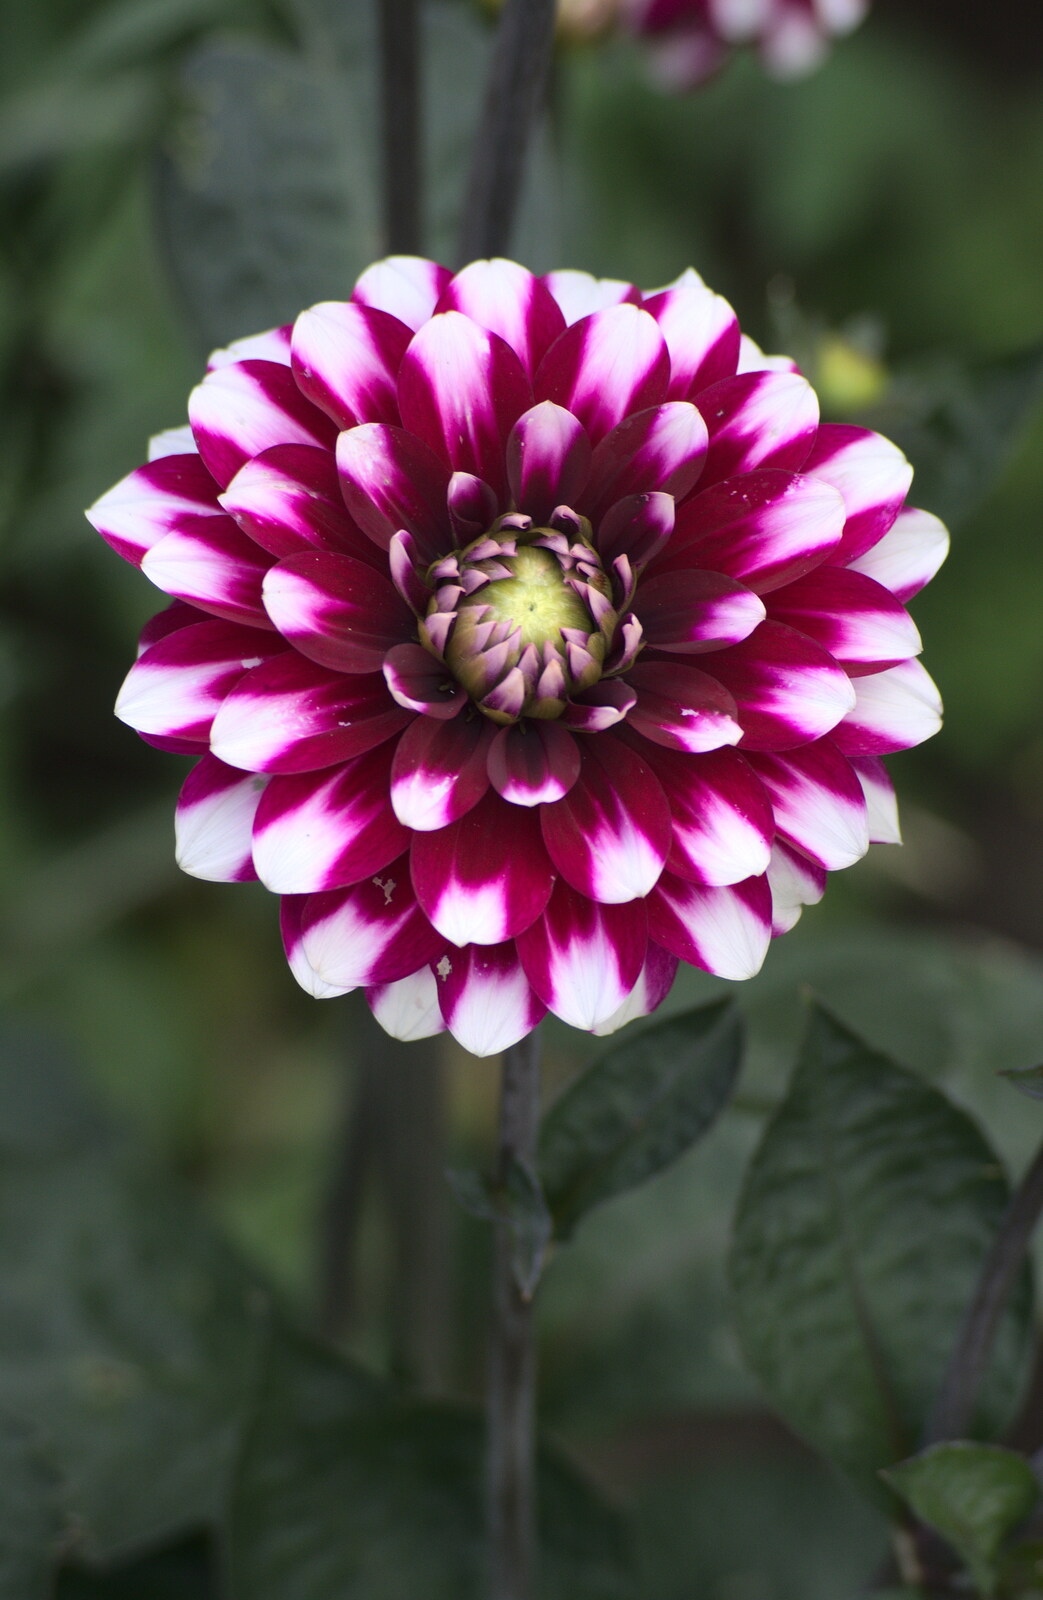 A Dahlia from An Interview with Rick Wakeman and Other Stories, Diss, Norfolk - 22nd July 2013